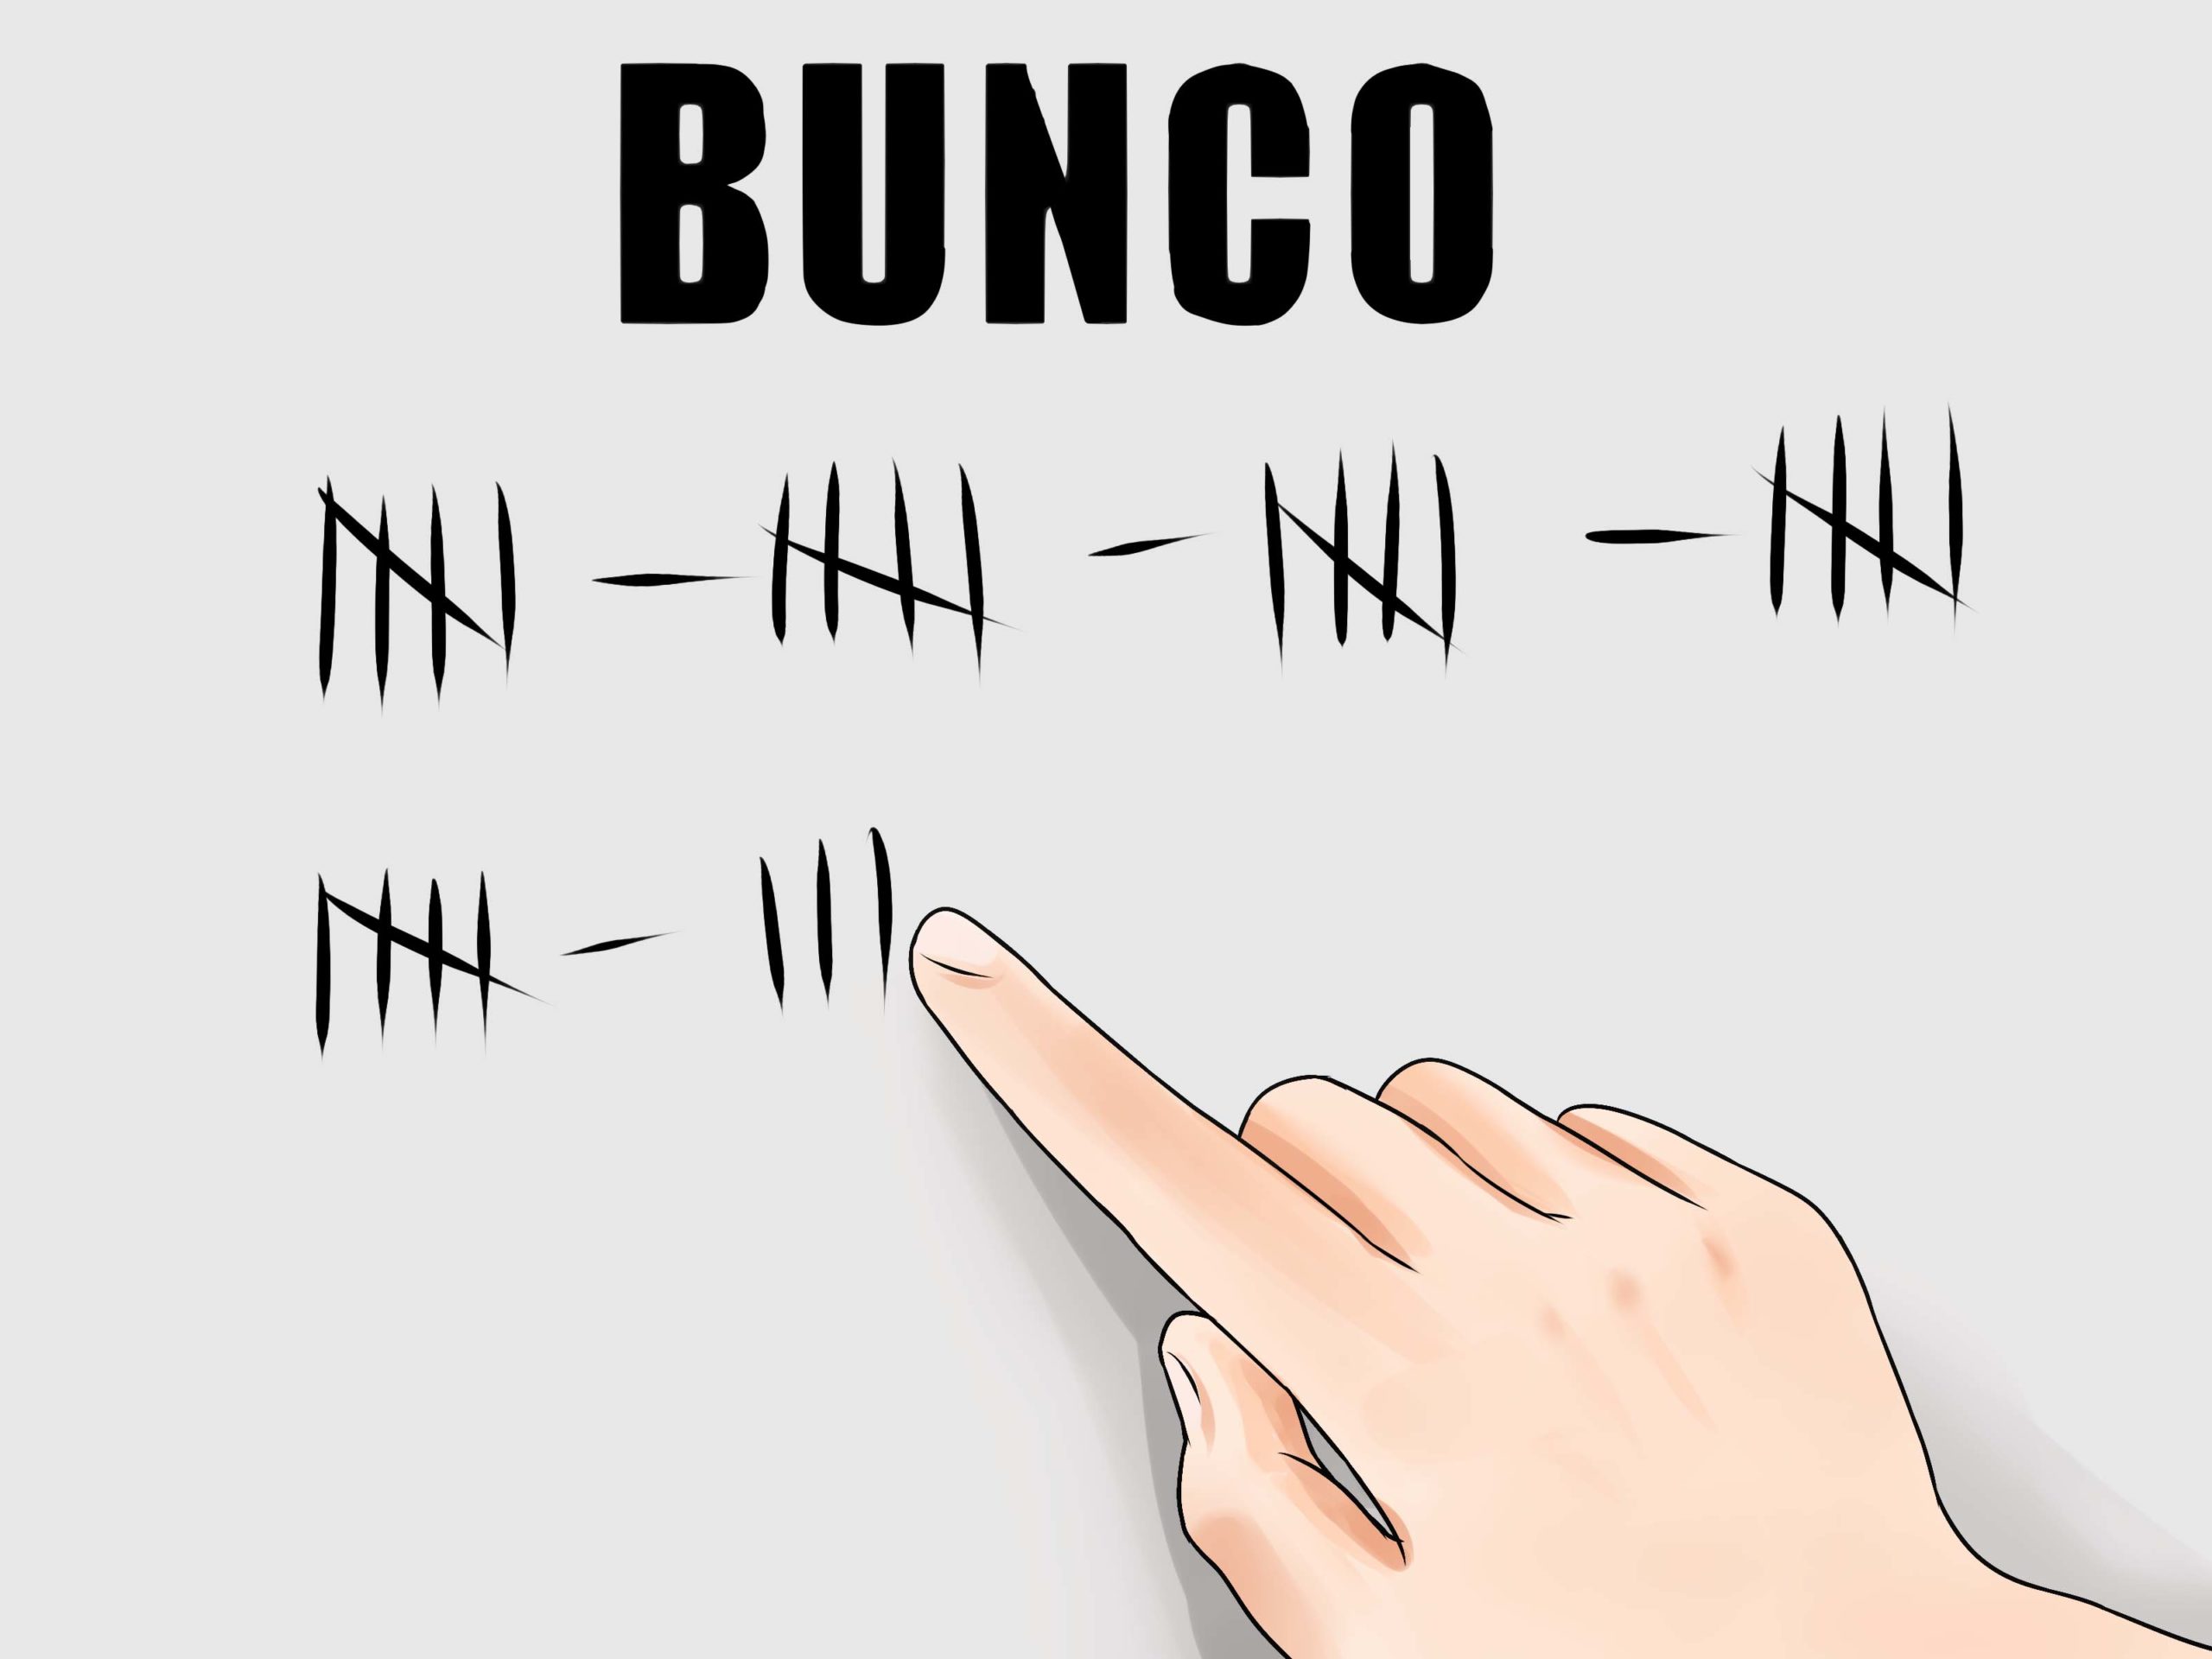 How to Play Bunco (with Pictures)